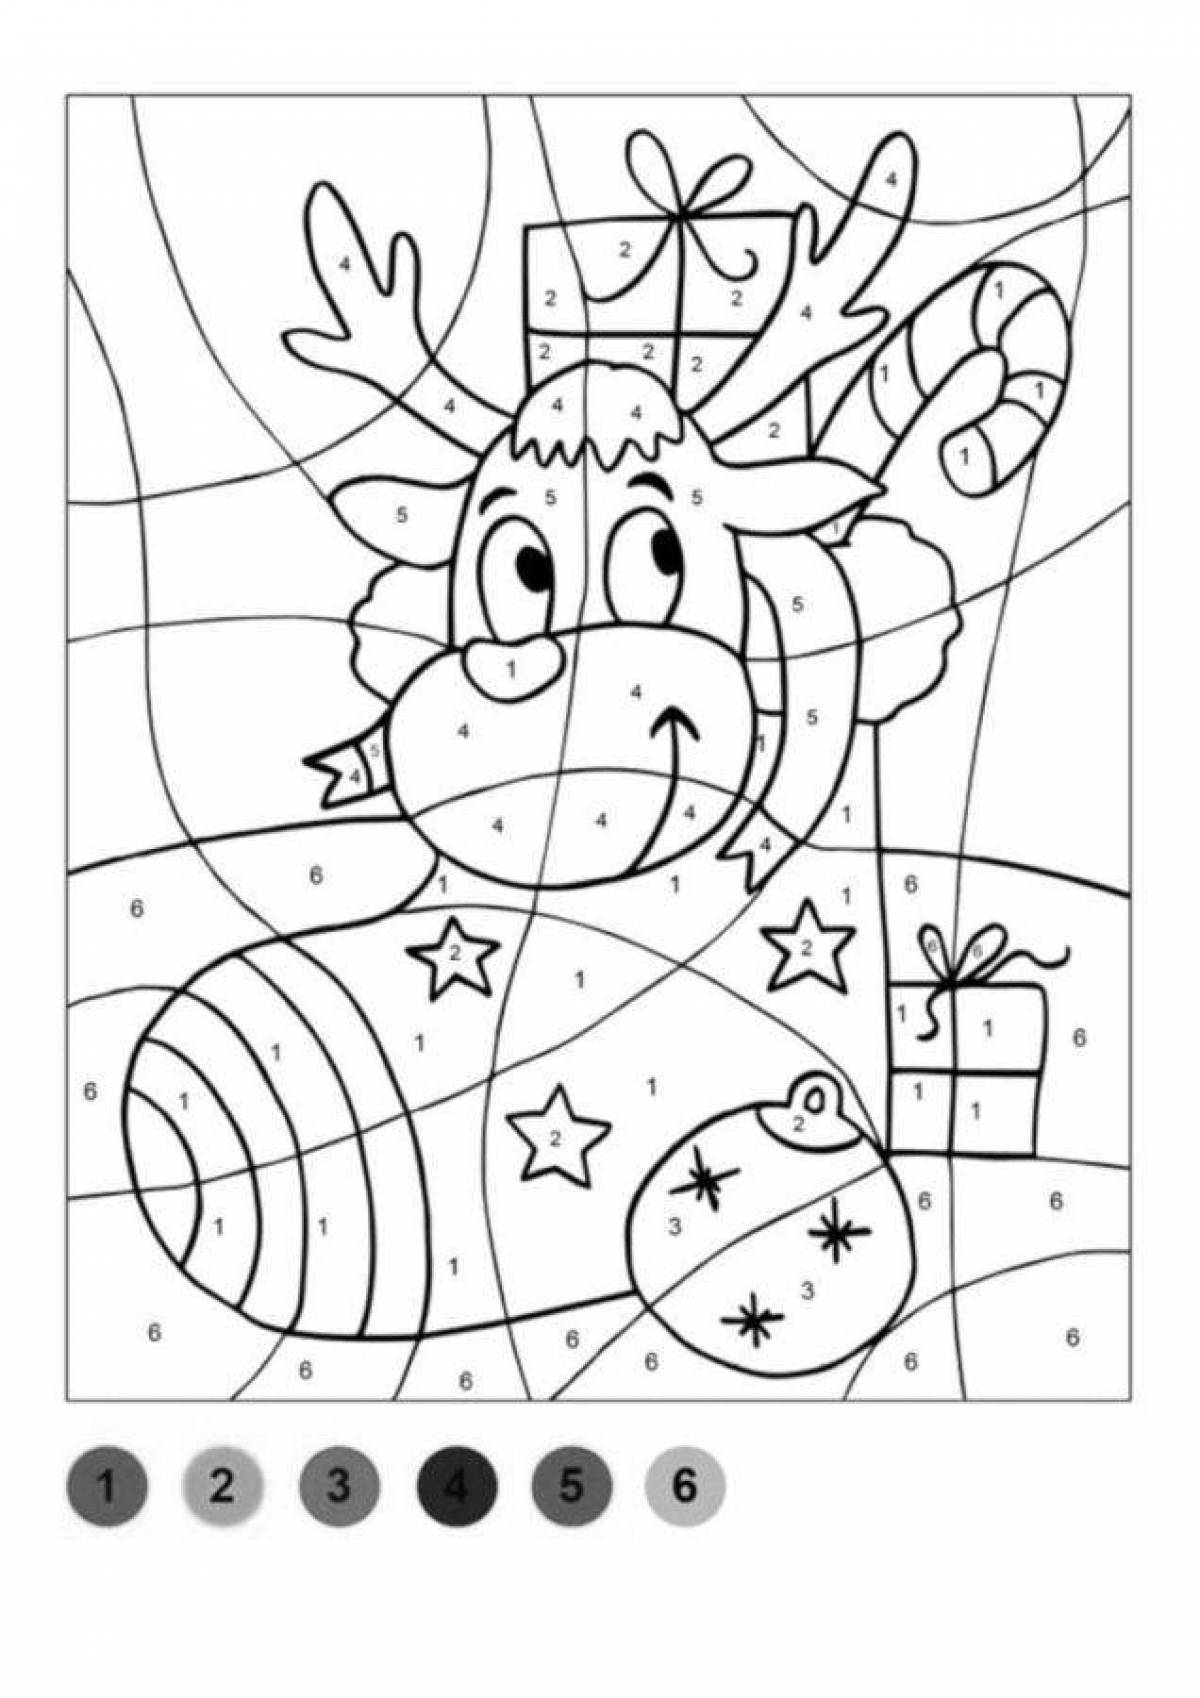 Colorful new year by numbers coloring book